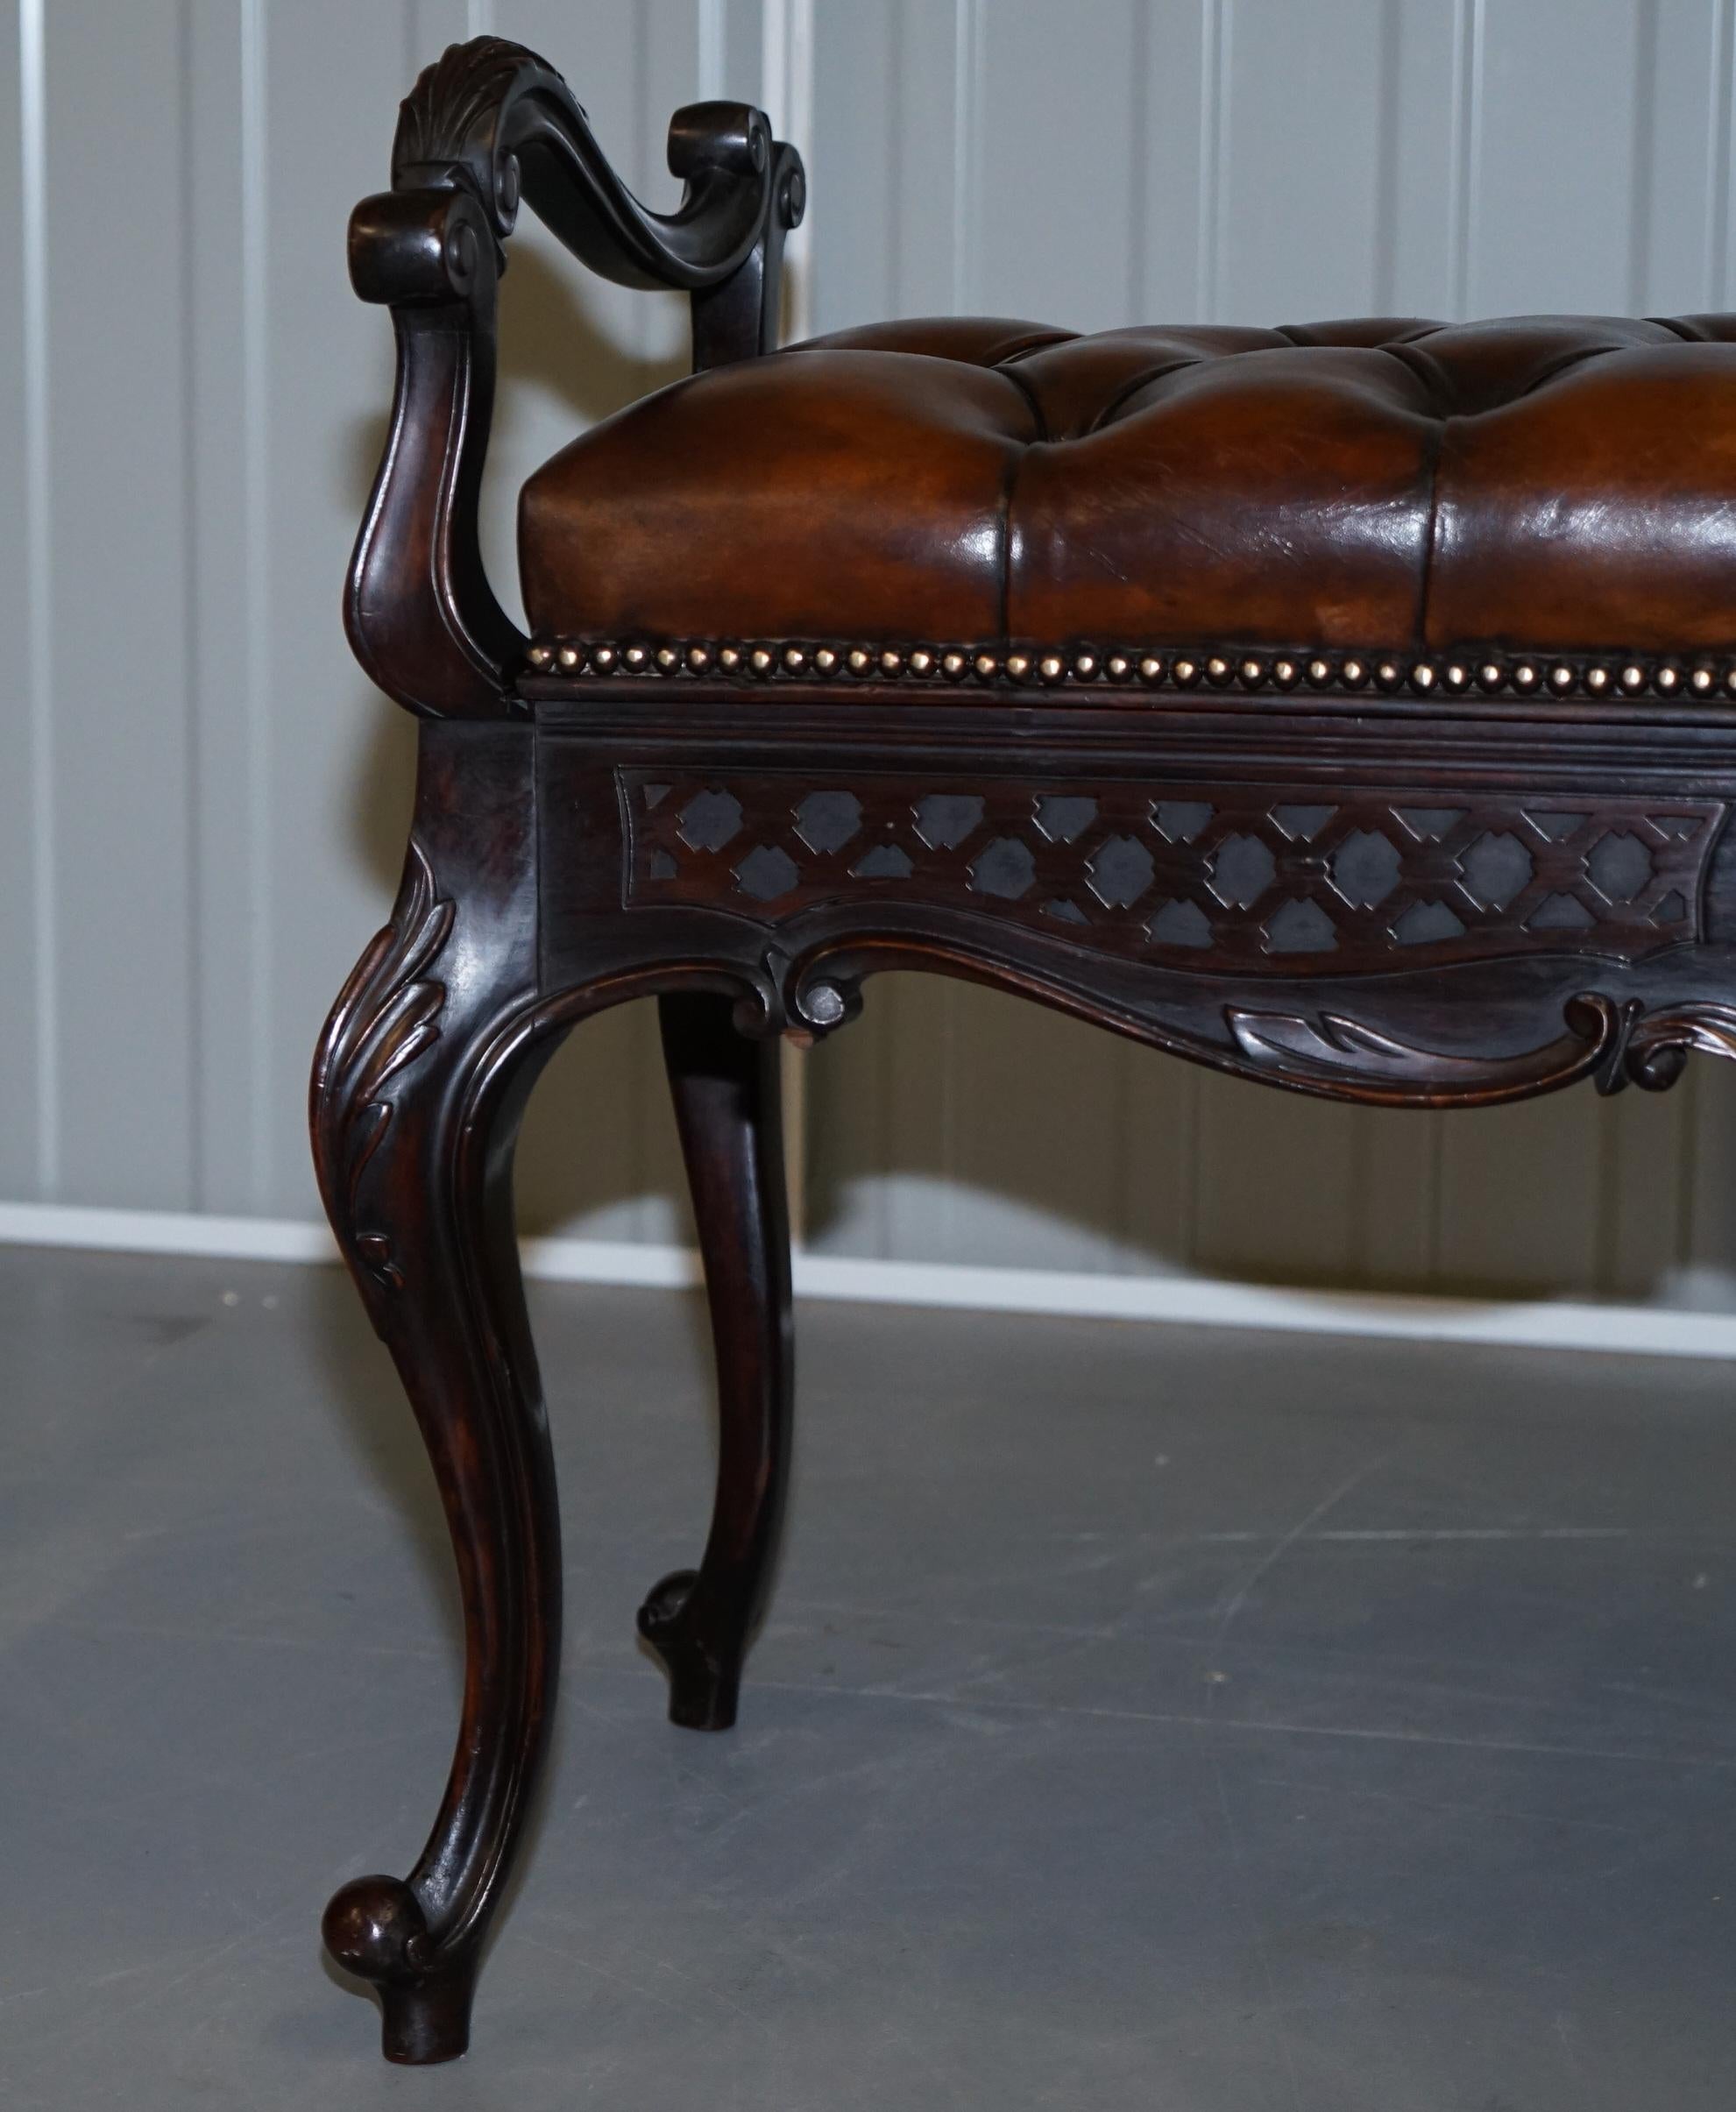 Hand-Crafted Fully Restored Victorian Chesterfield Brown Leather Piano Stool Bench 2 Person